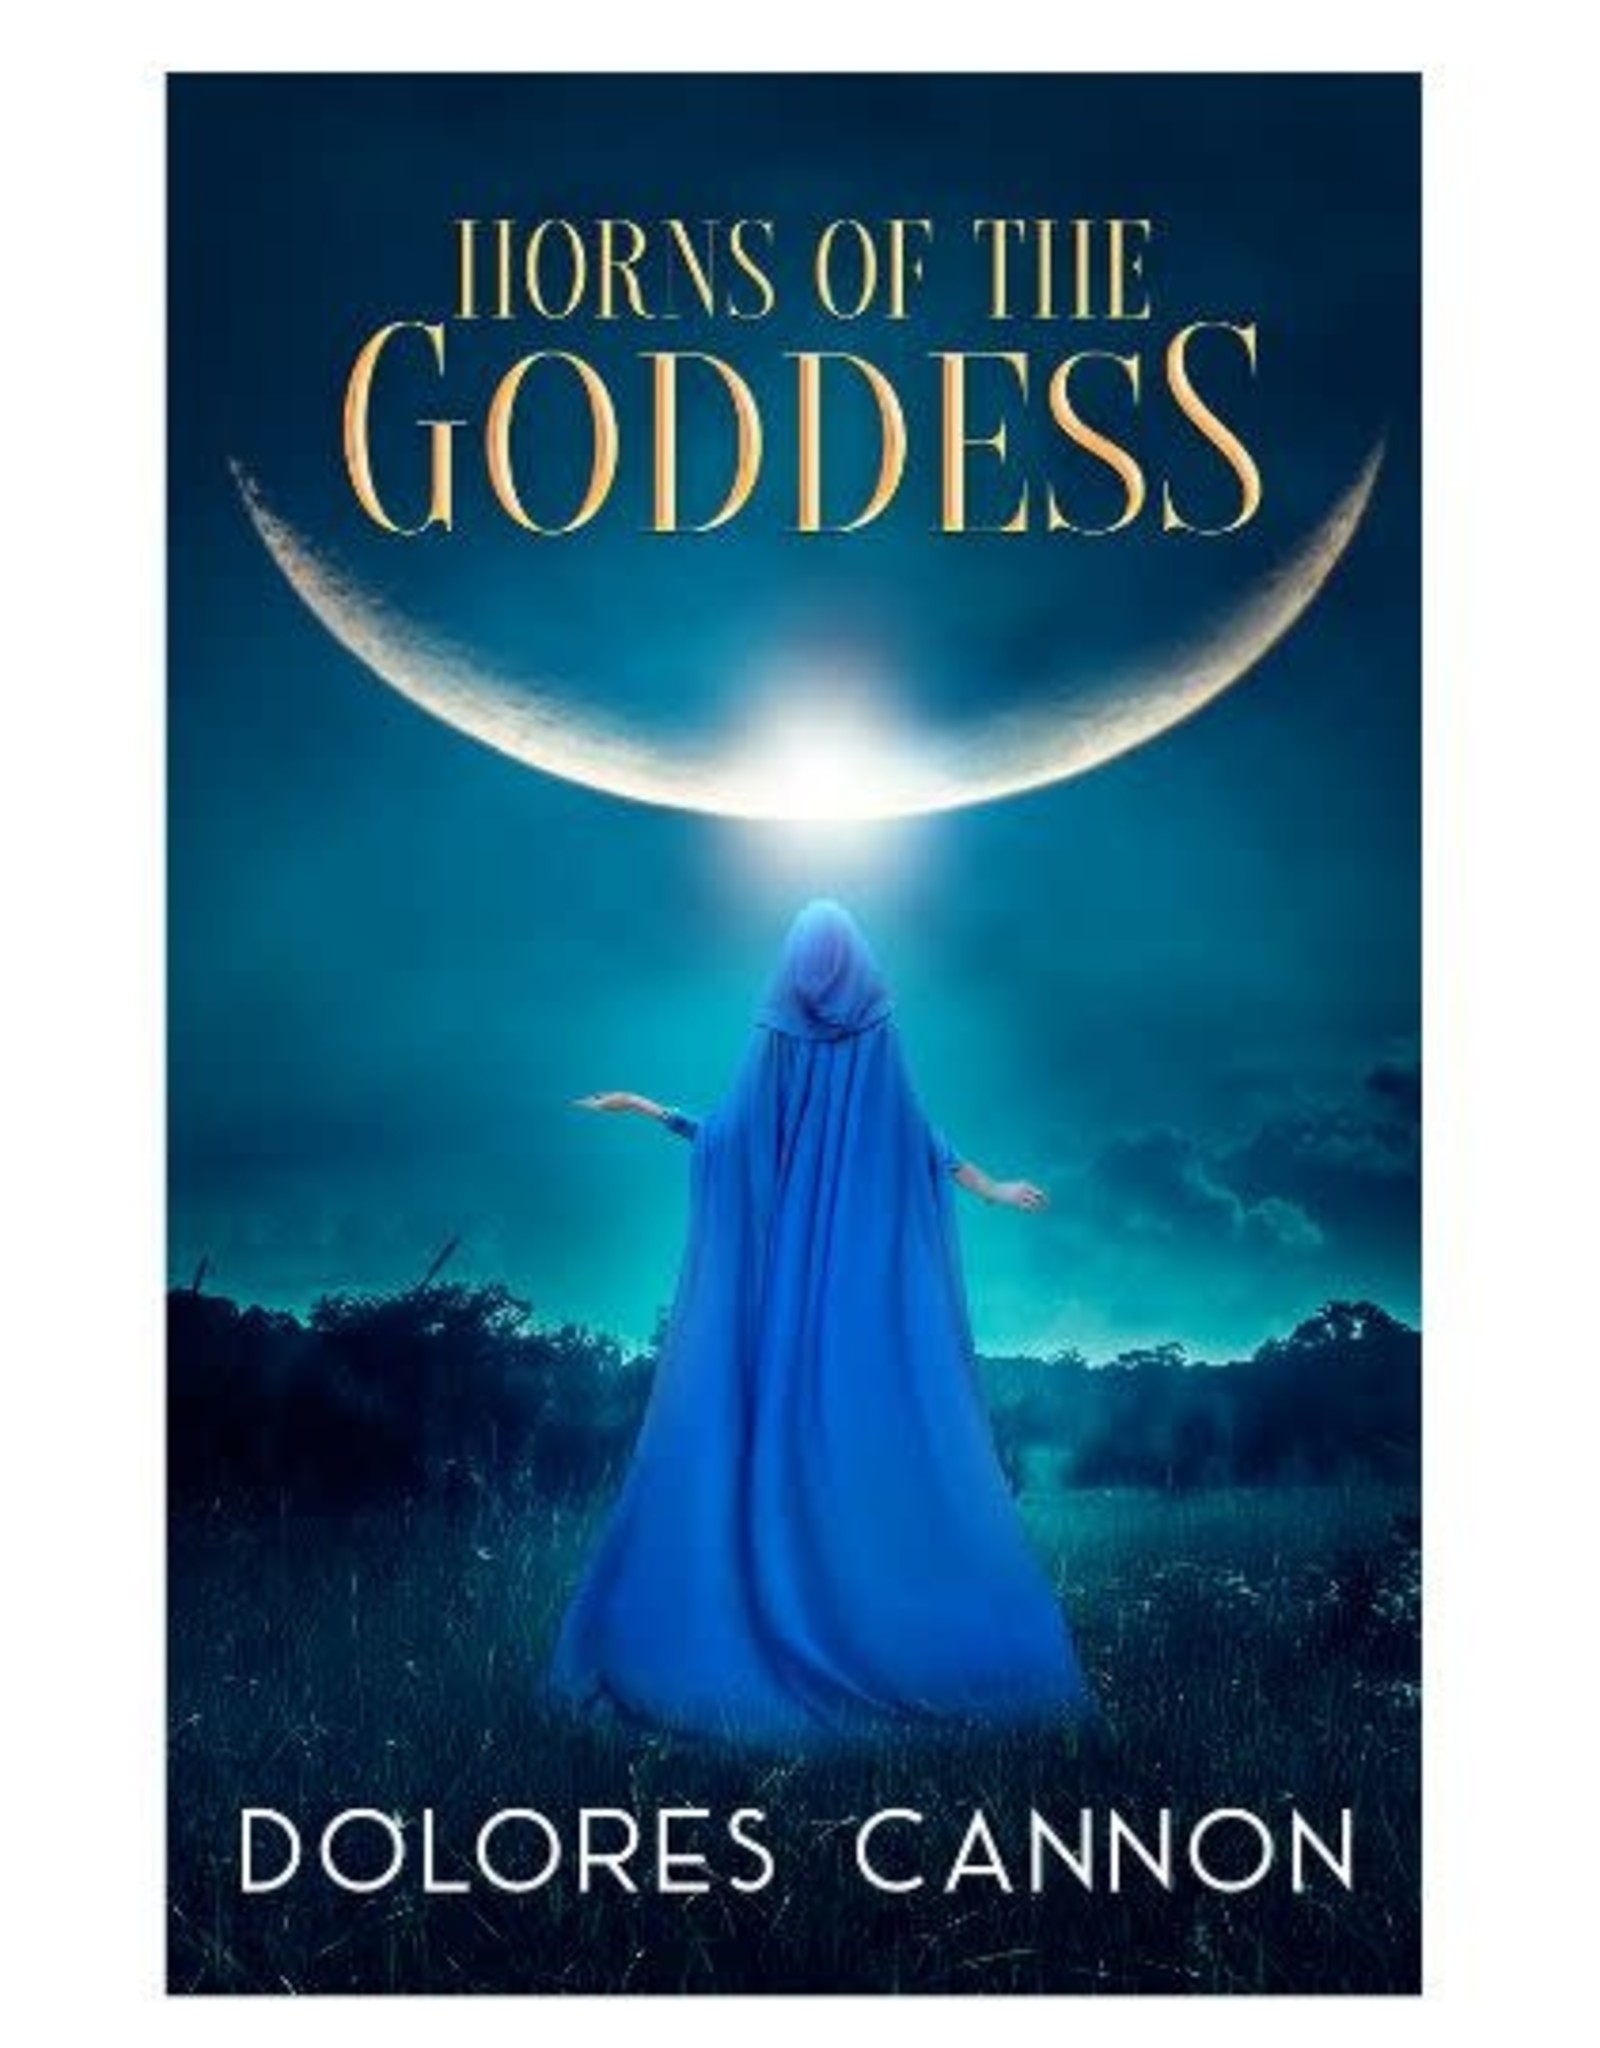 Horns of the Goddess by Dolores Cannon